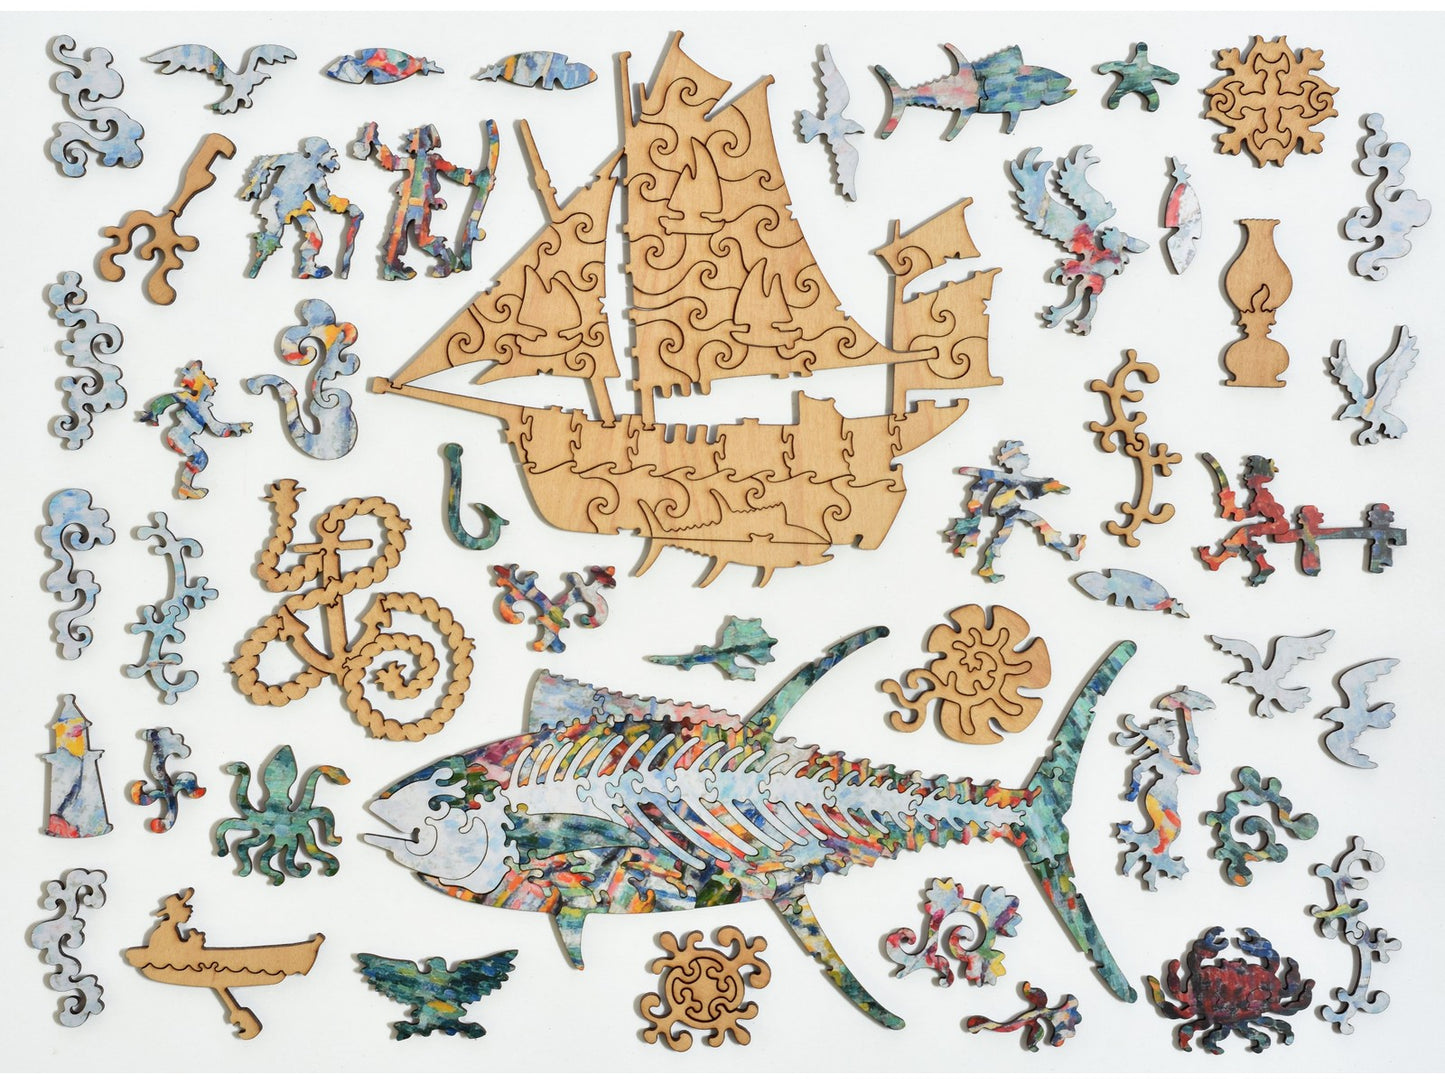 The whimsies that can be found in the puzzle, Blessing of the Tuna Fleet.